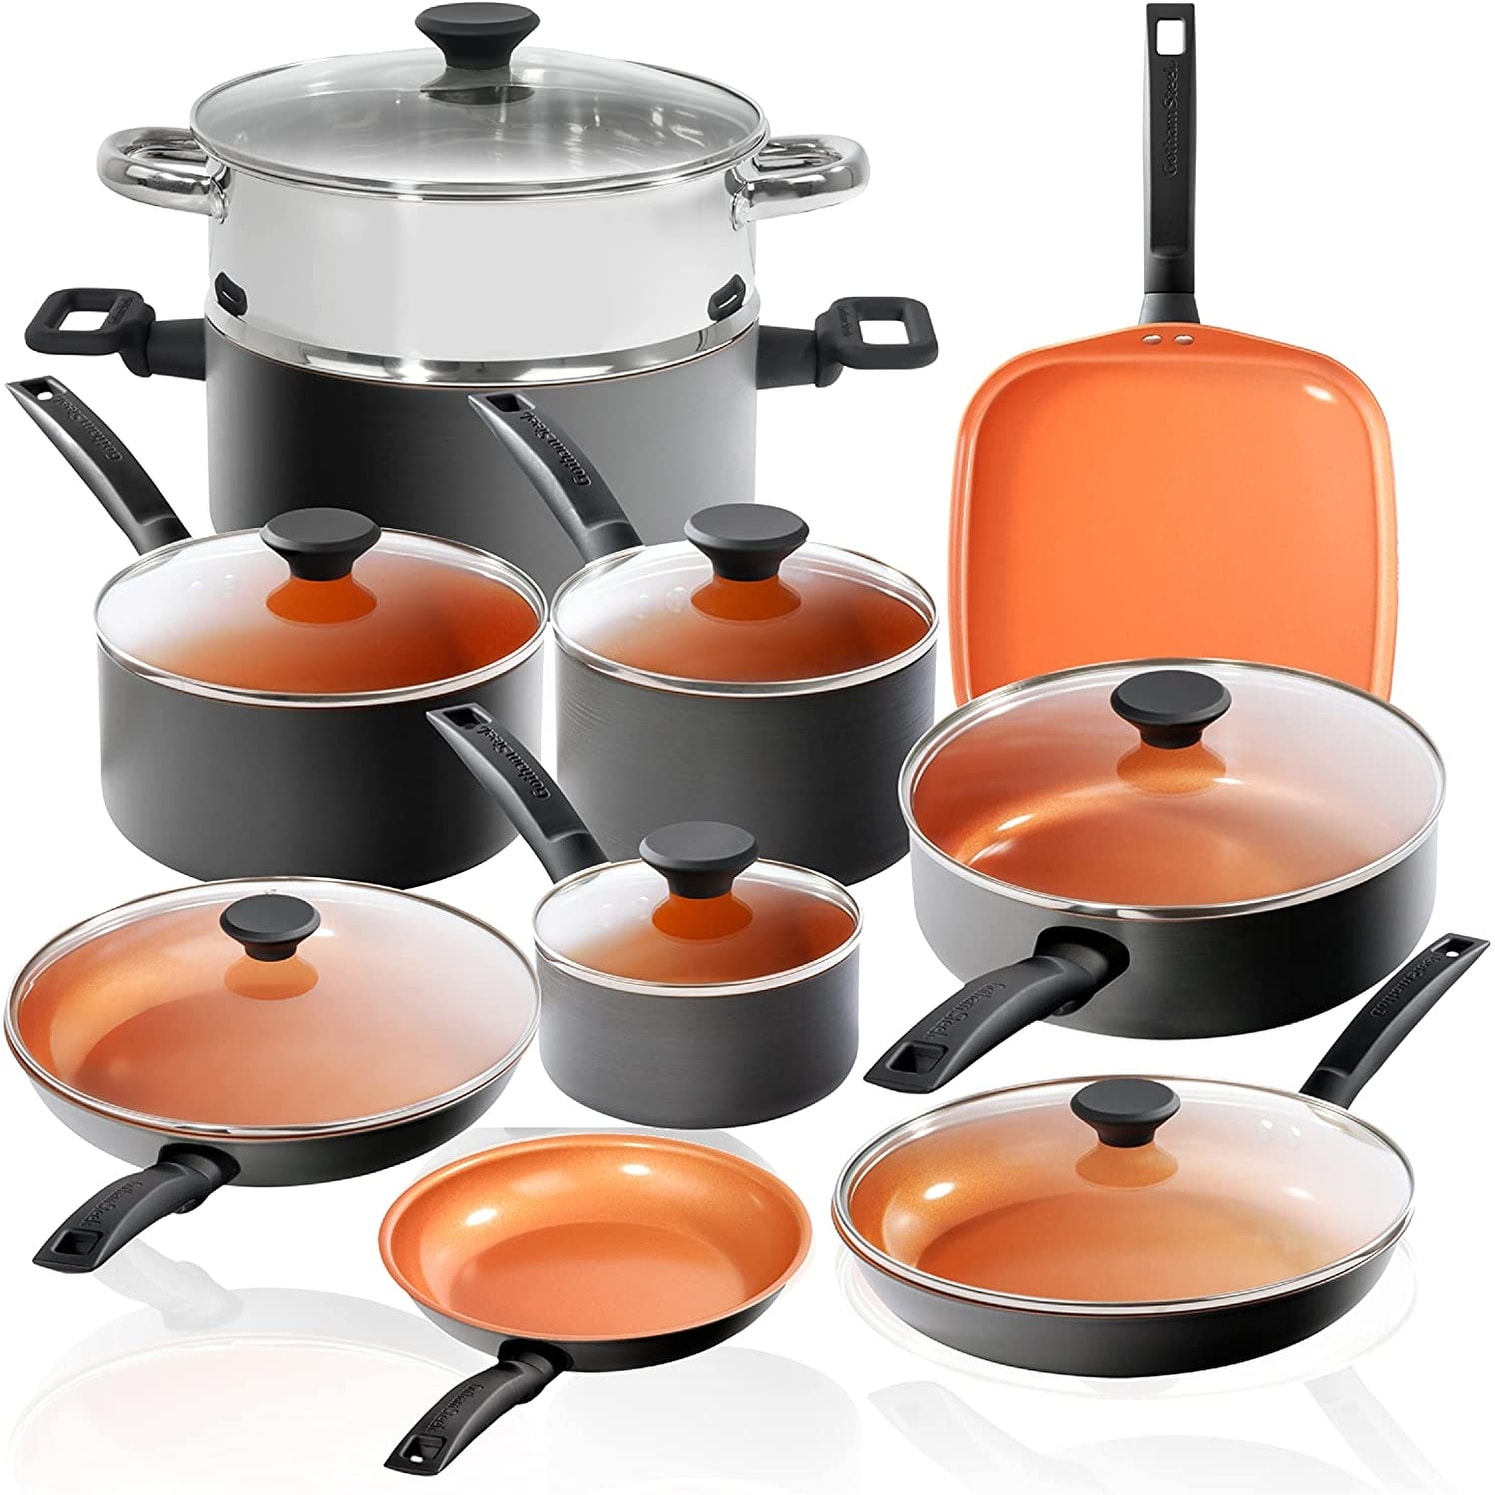 https://ak1.ostkcdn.com/images/products/is/images/direct/29bad71ac7552593a3a8362929df65422e59b024/Gotham-Steel-Pro-Premier-Pots-and-Pans-Set-Nonstick%2C-17-Pc-Hard-Anodized-Kitchen-Cookware-Set%2C-Ceramic-Coated.jpg